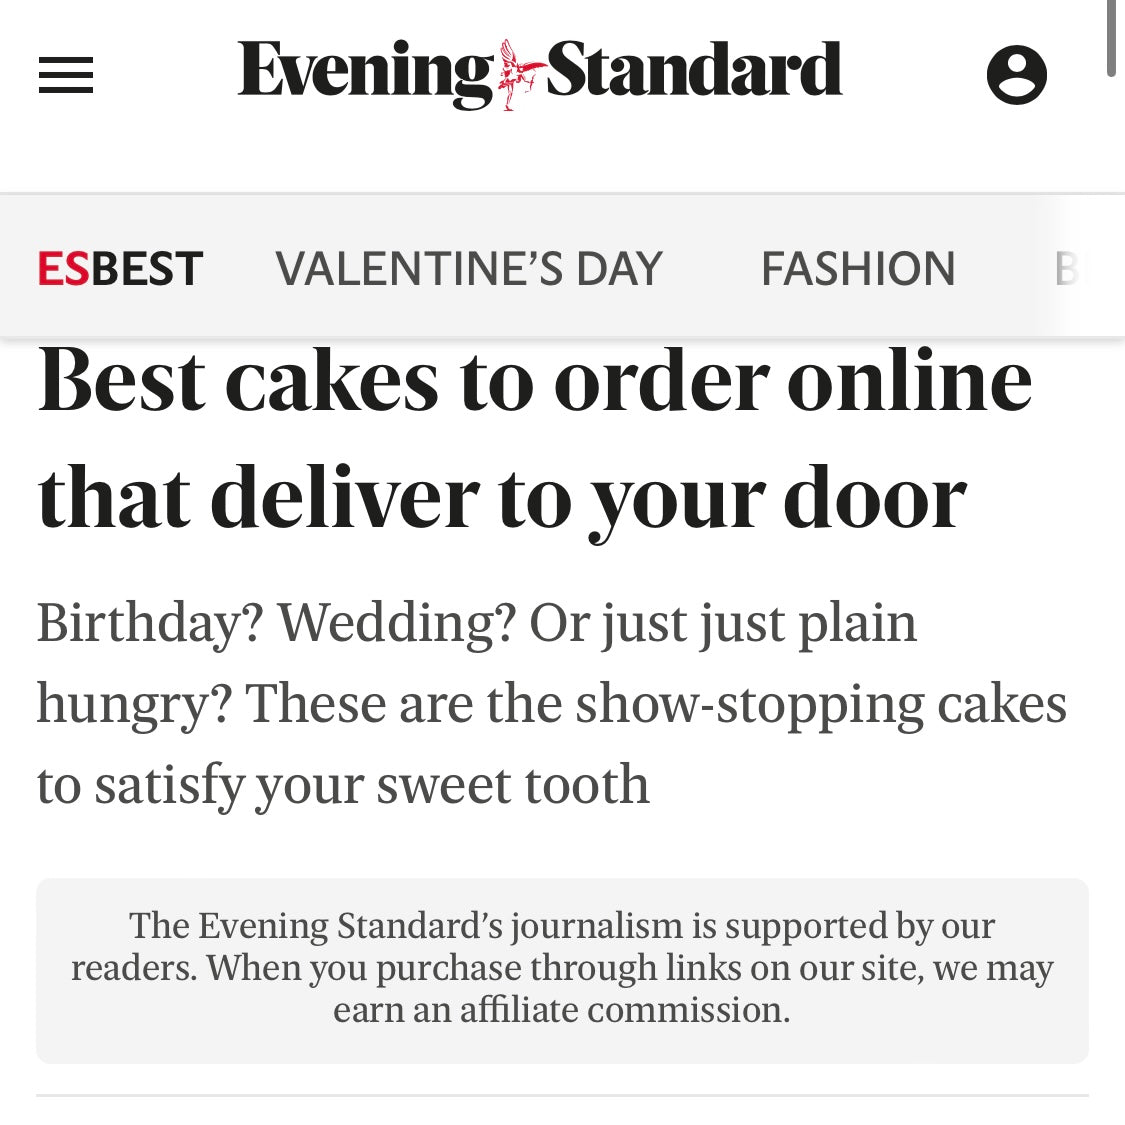 Evening Standard Best Cakes For Online Delivery